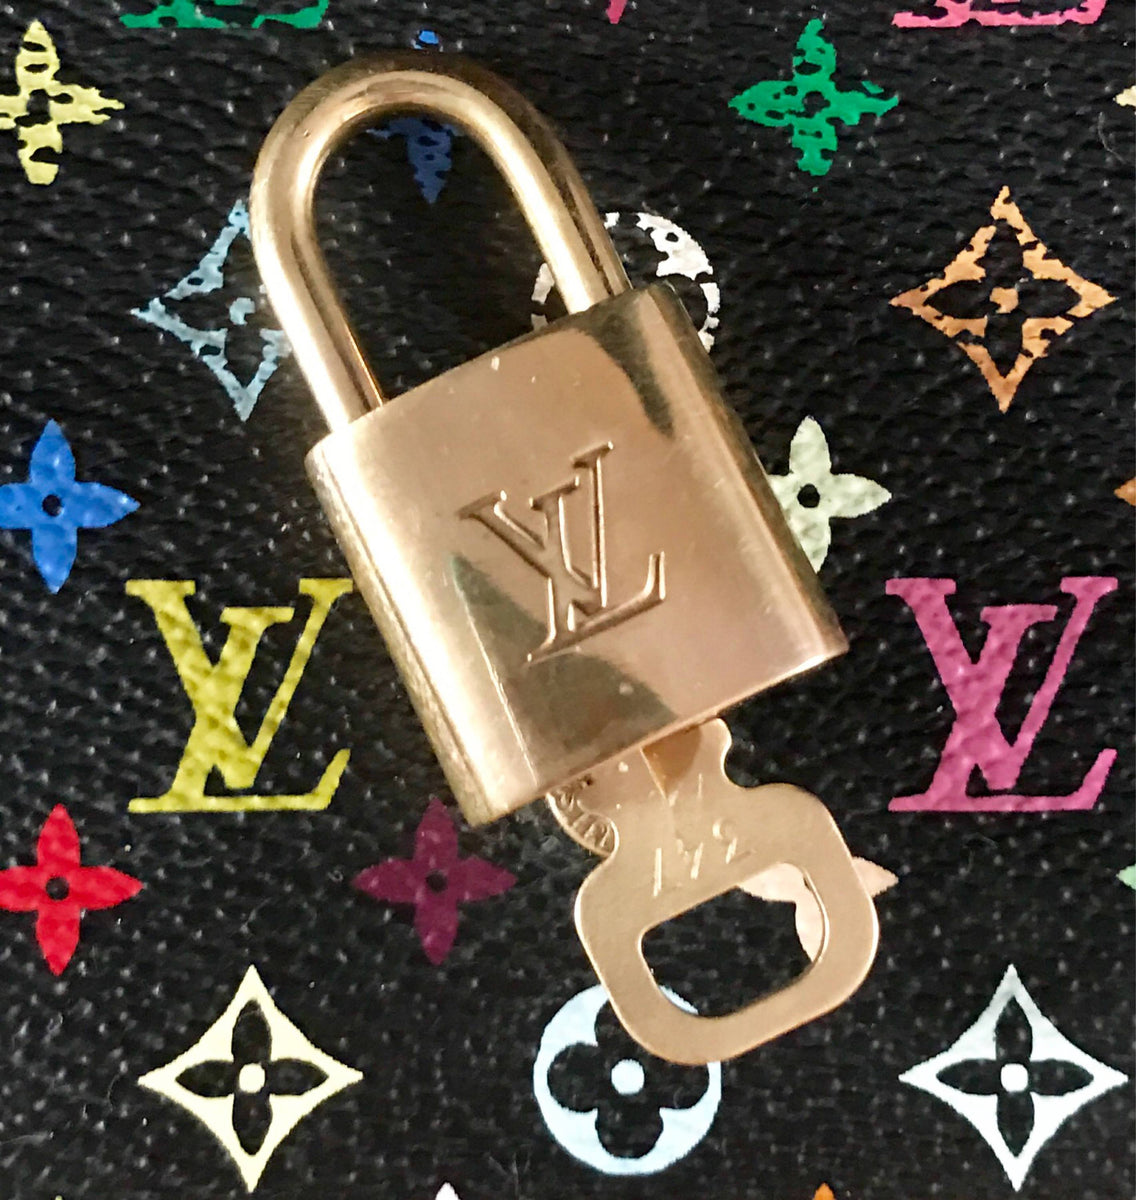 vuitton luggage tags